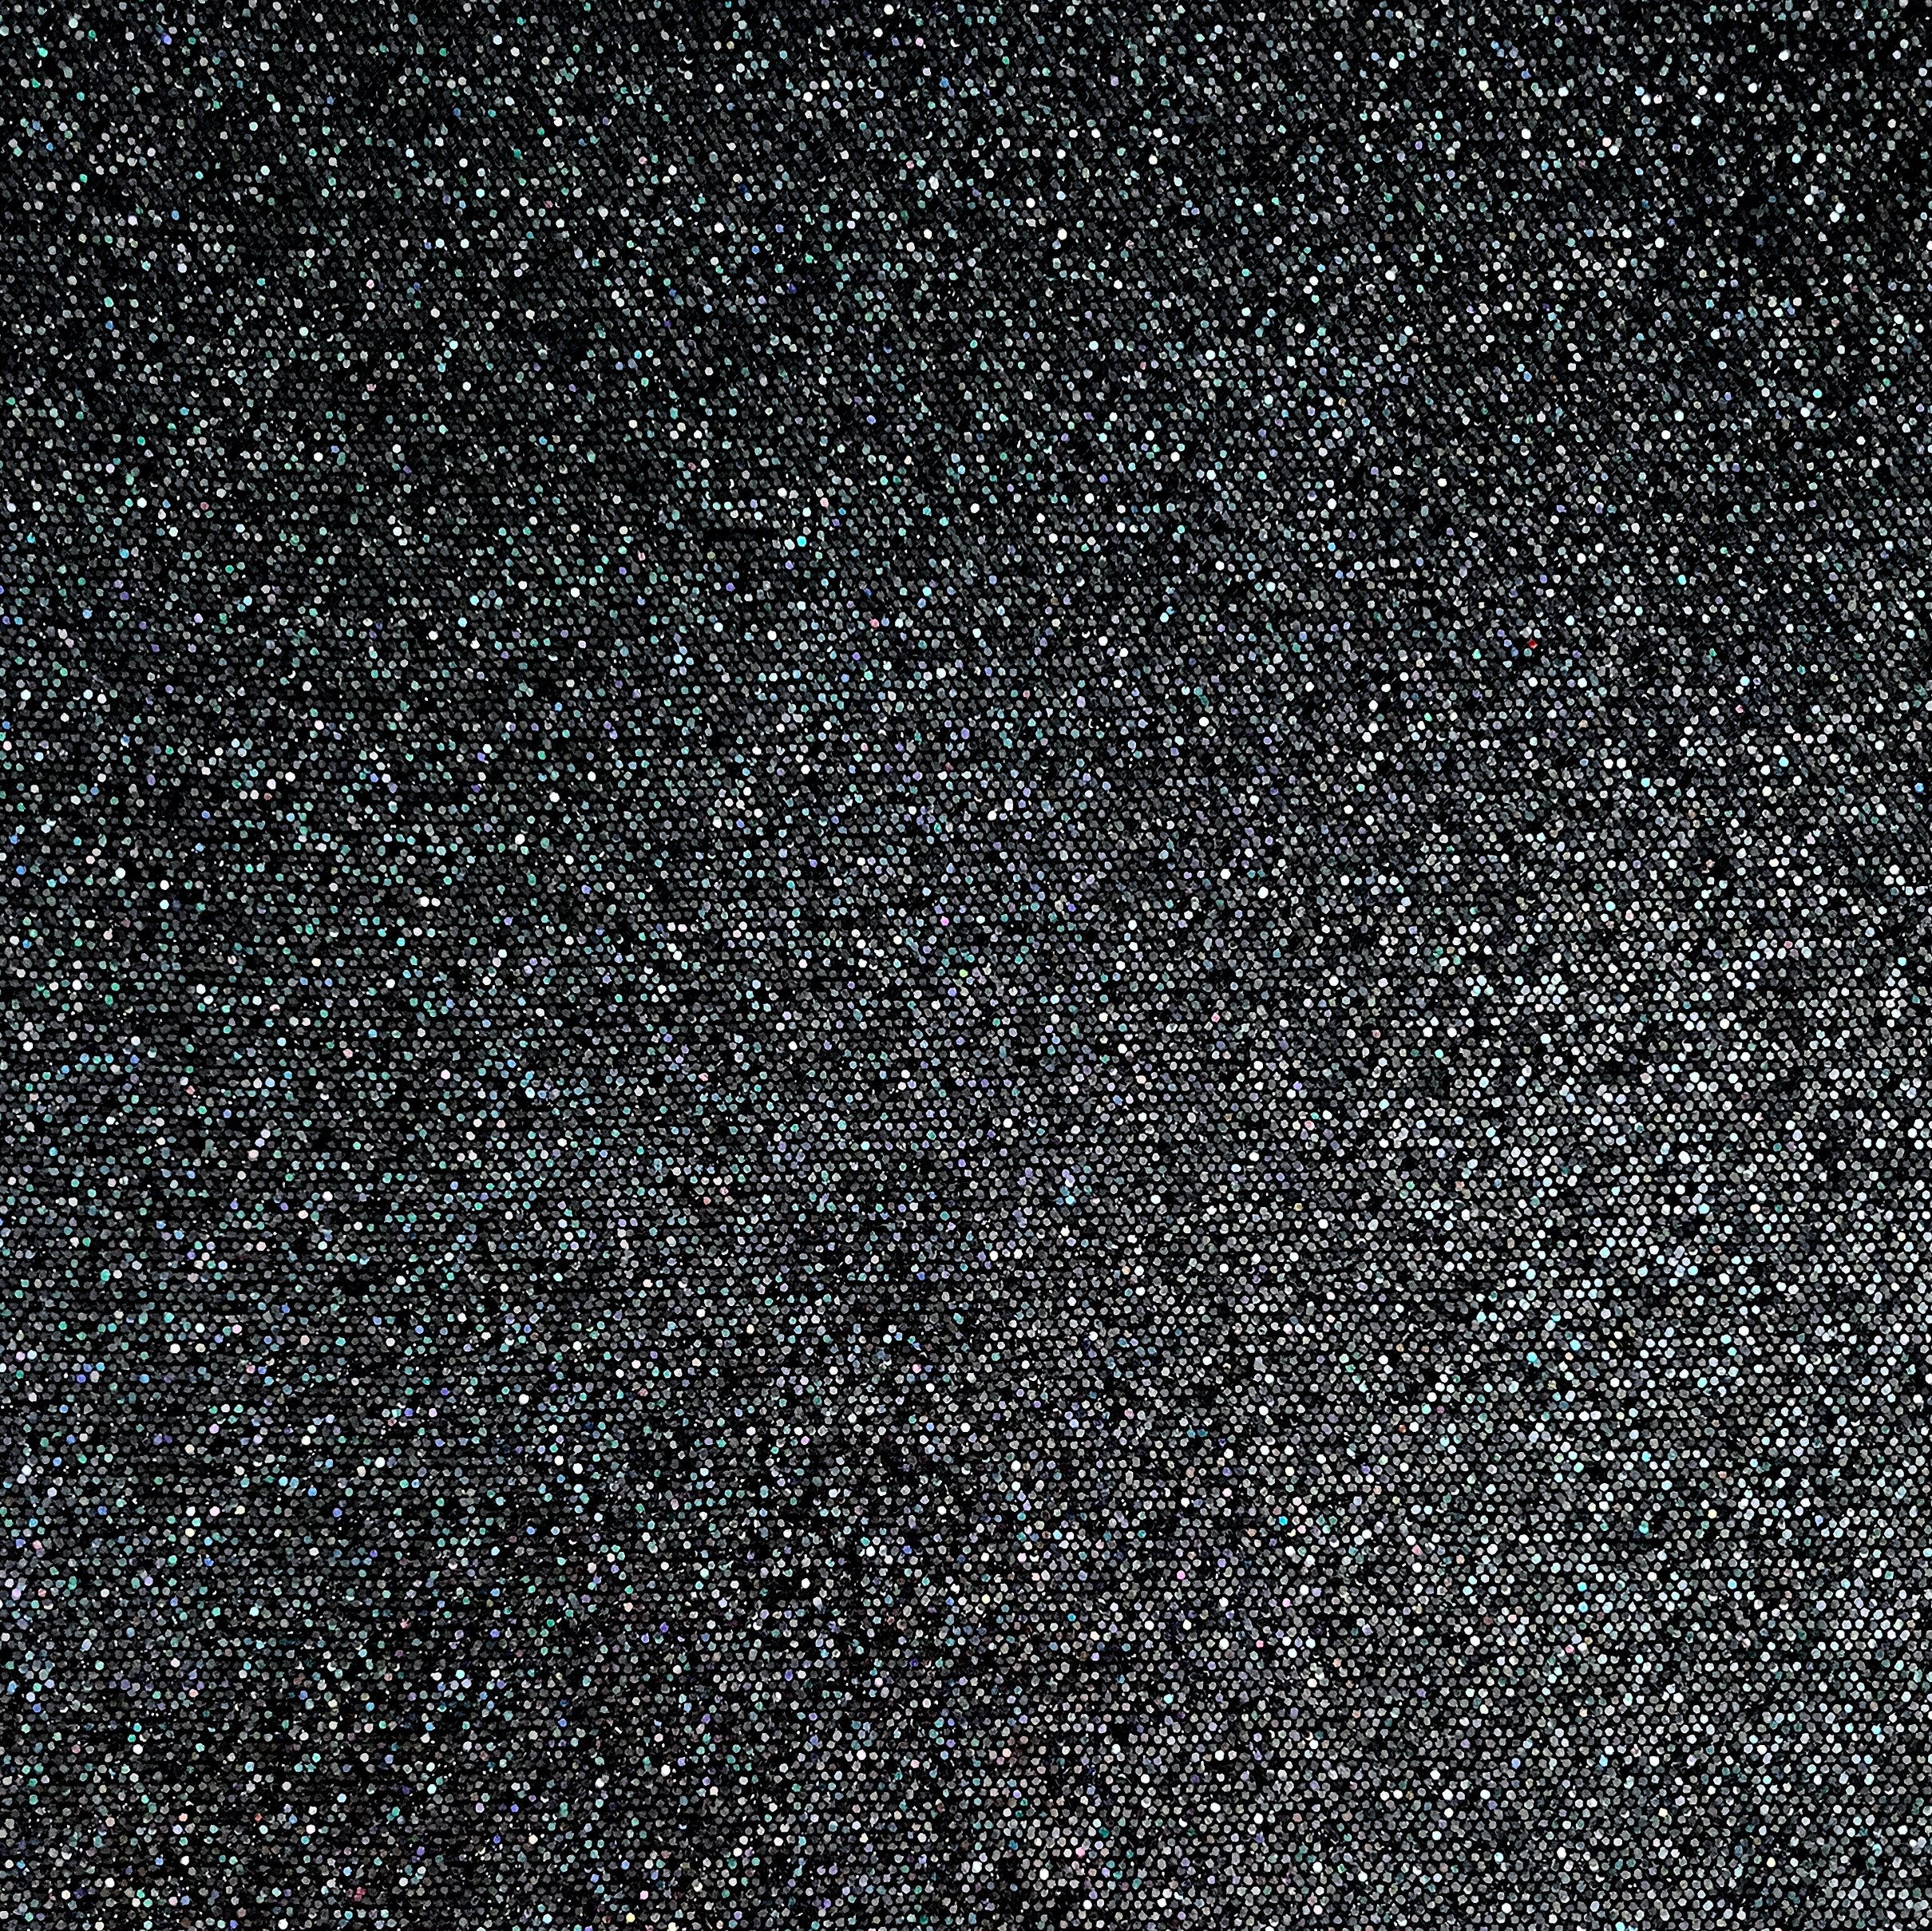 Black Glitter Card Stock for die cutting, holiday cards, and